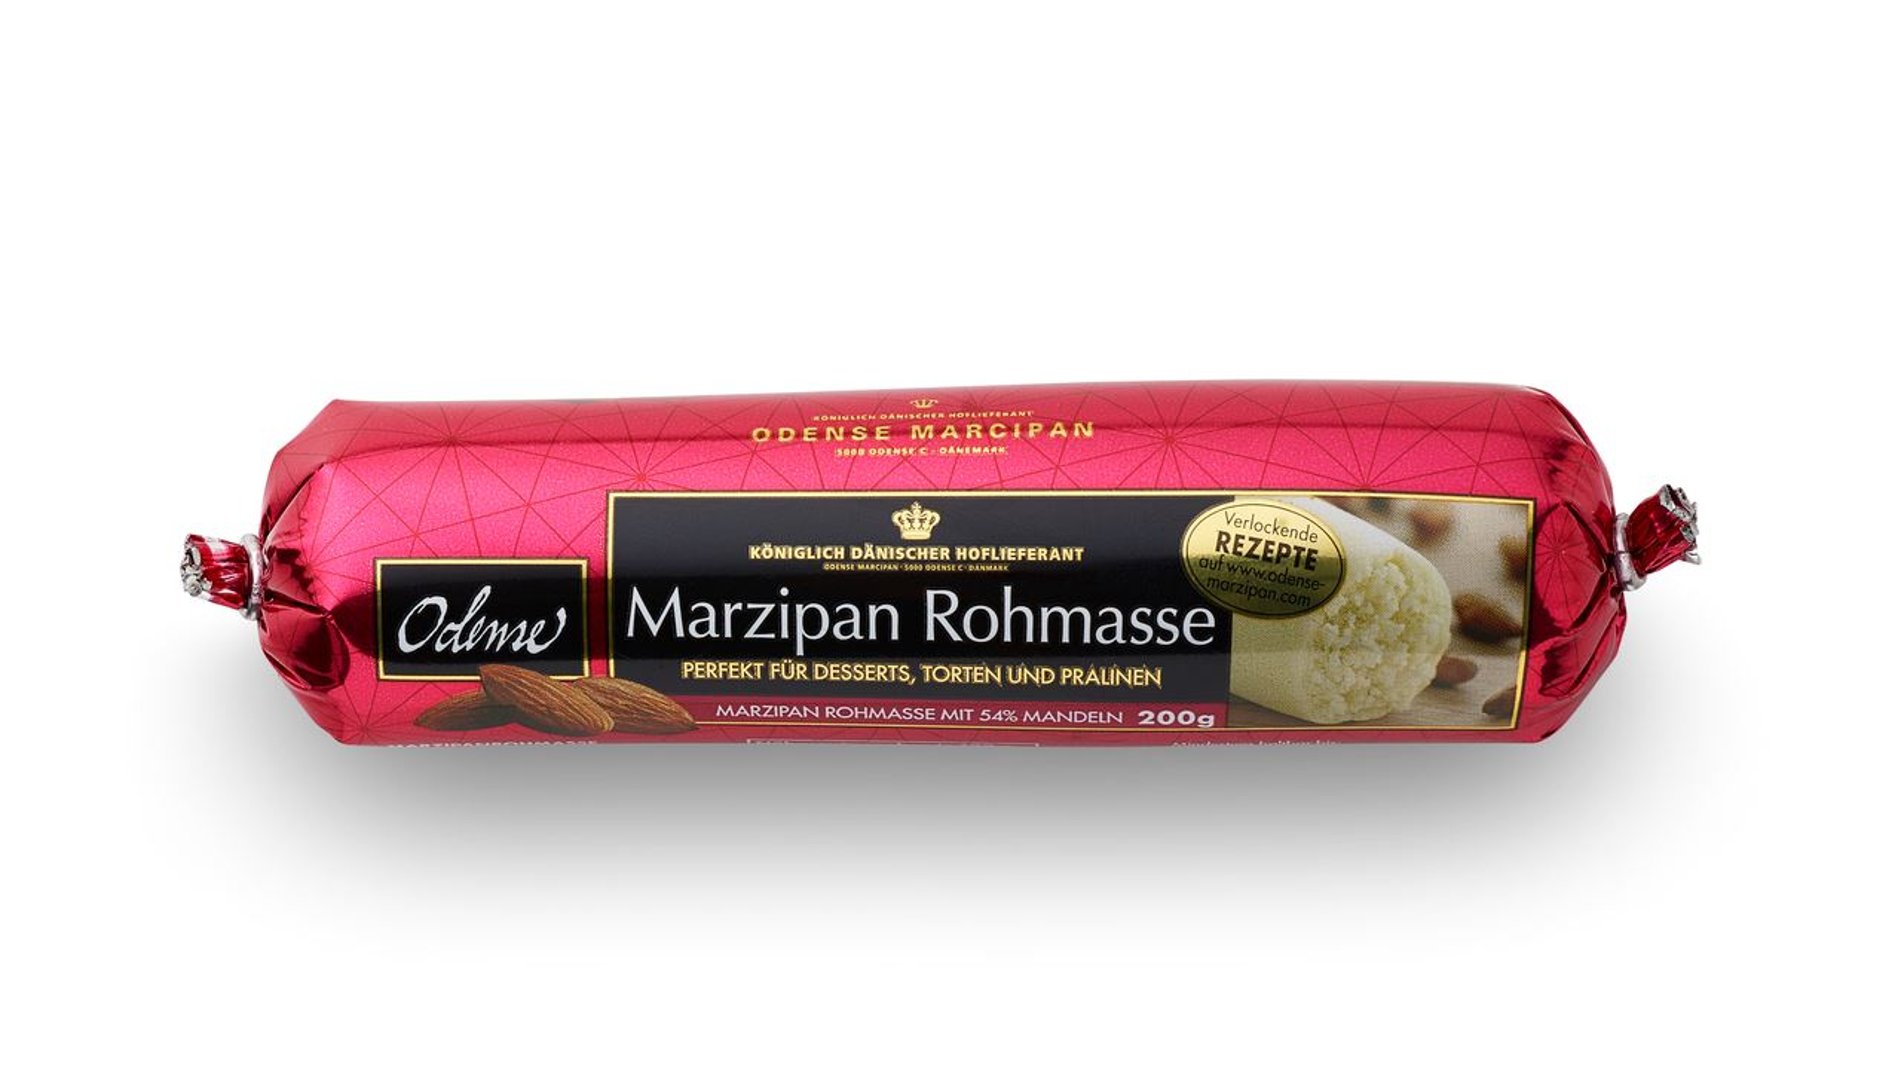 Odense - Marzipan Rohmasse 200 g Rolle